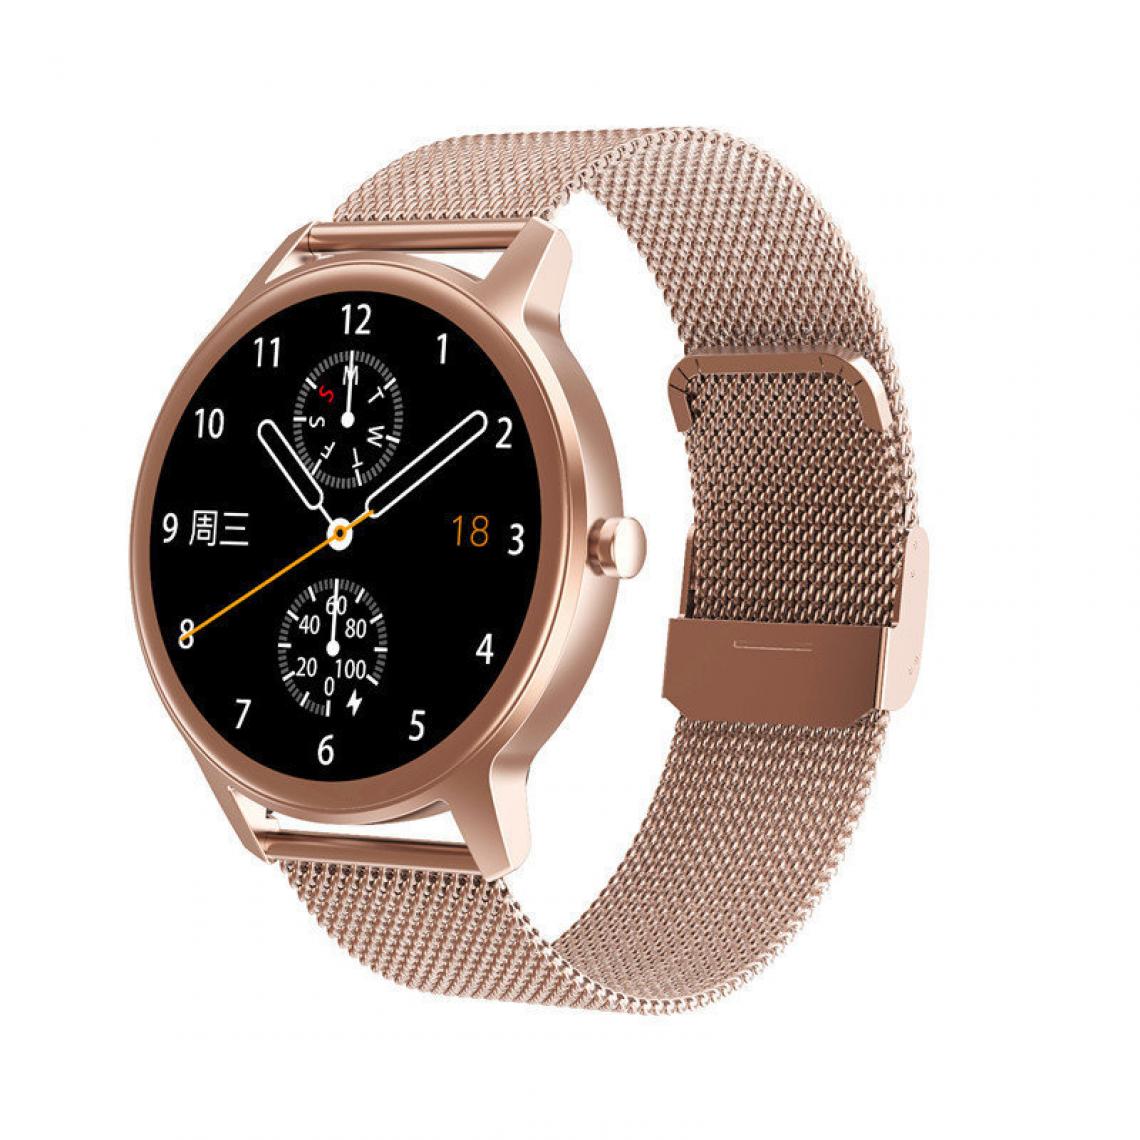 Chronotech Montres - Chronus Smart Watch Women with Heart Rate Healthy Care, Calorie Counter Sleep Monitor(gold) - Montre connectée